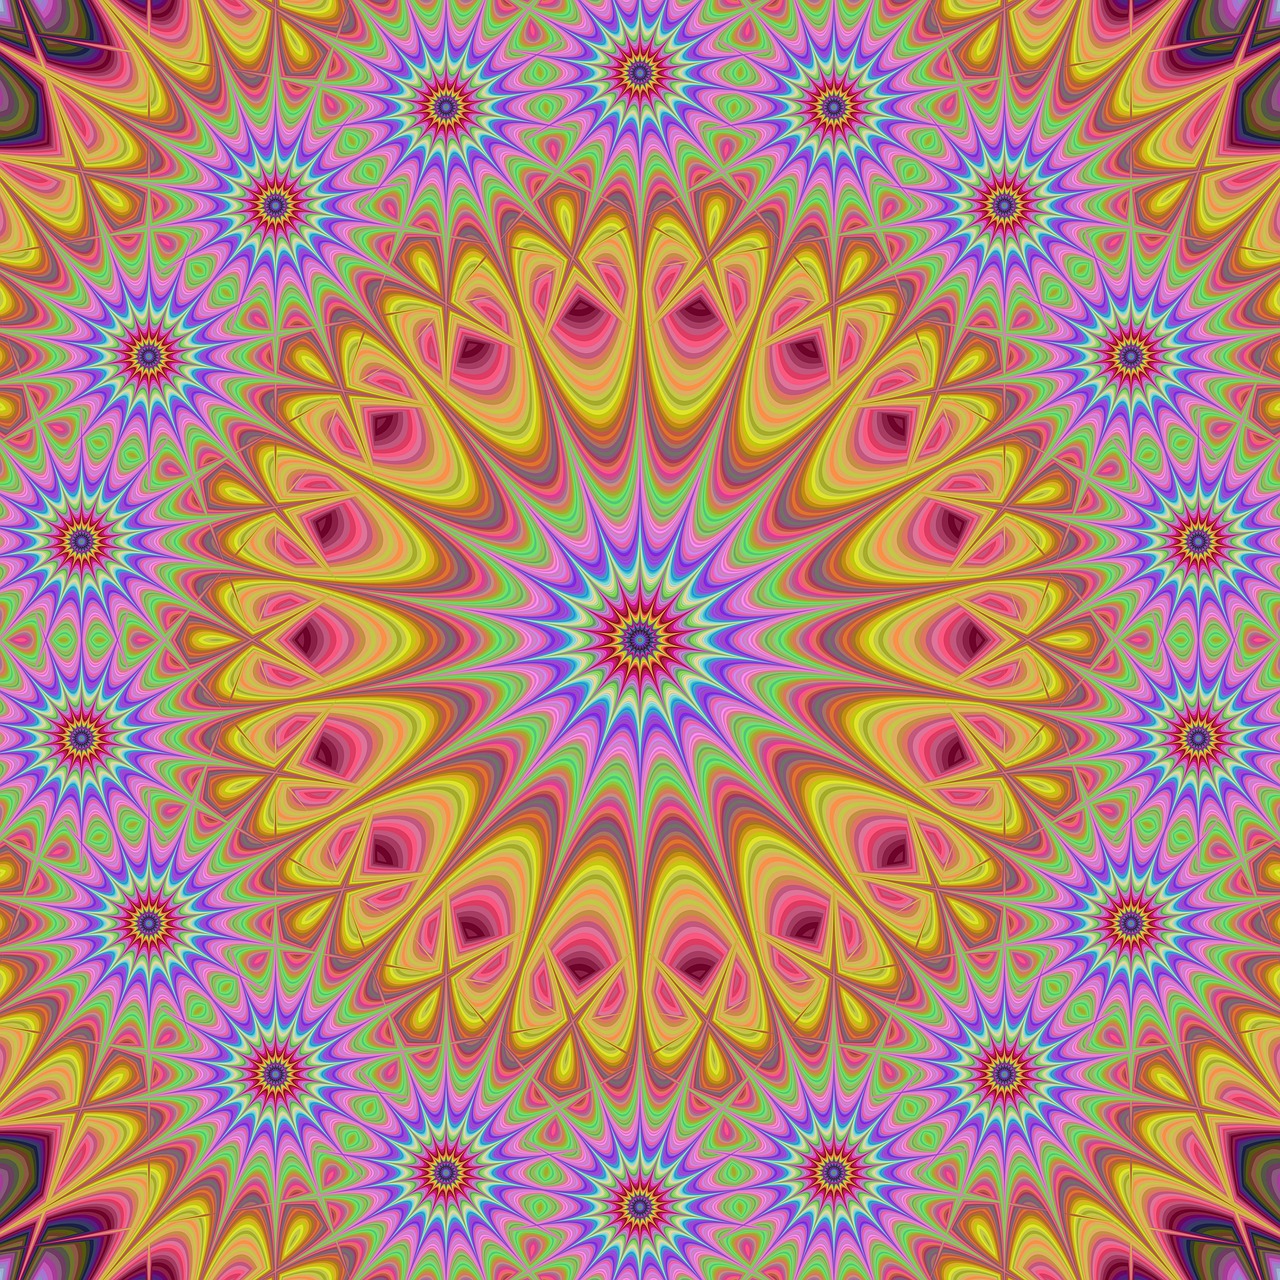 a psychedelic psychedelic psychedelic psychedelic psychedelic psychedelic psychedelic psychedelic psychedelic psychedelic psychedelic psychedelic psychedelic psychedelic psychedelic psychedelic psychedelic, a digital rendering, inspired by Victor Moscoso, trending on pixabay, beautiful moorish ornament, pink yellow flowers, multiple purple halos, centered radial design